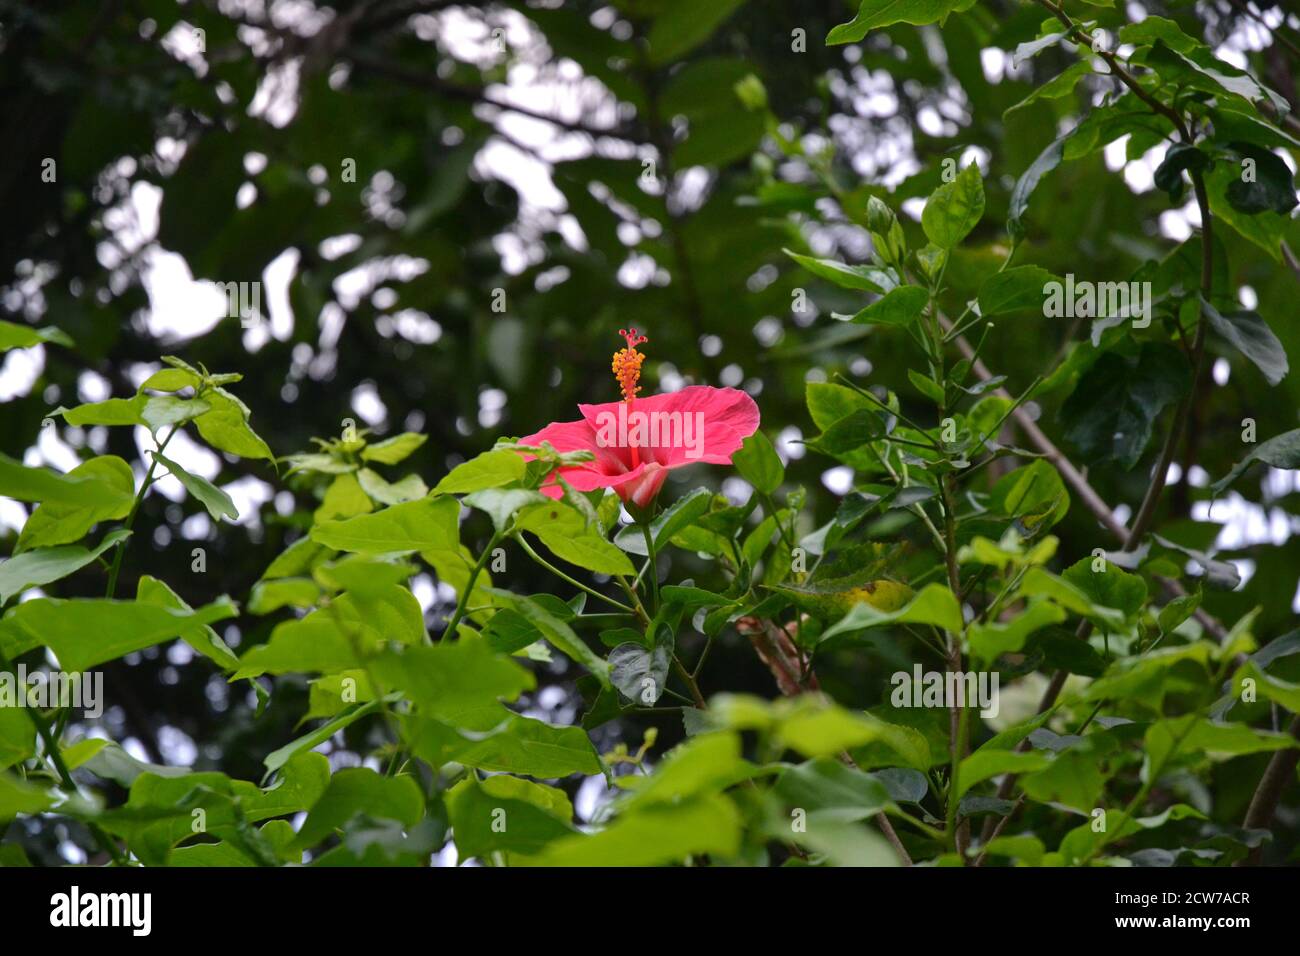 A beautiful hibiscus flower in the middle of green leaves looks beautiful. Stock Photo